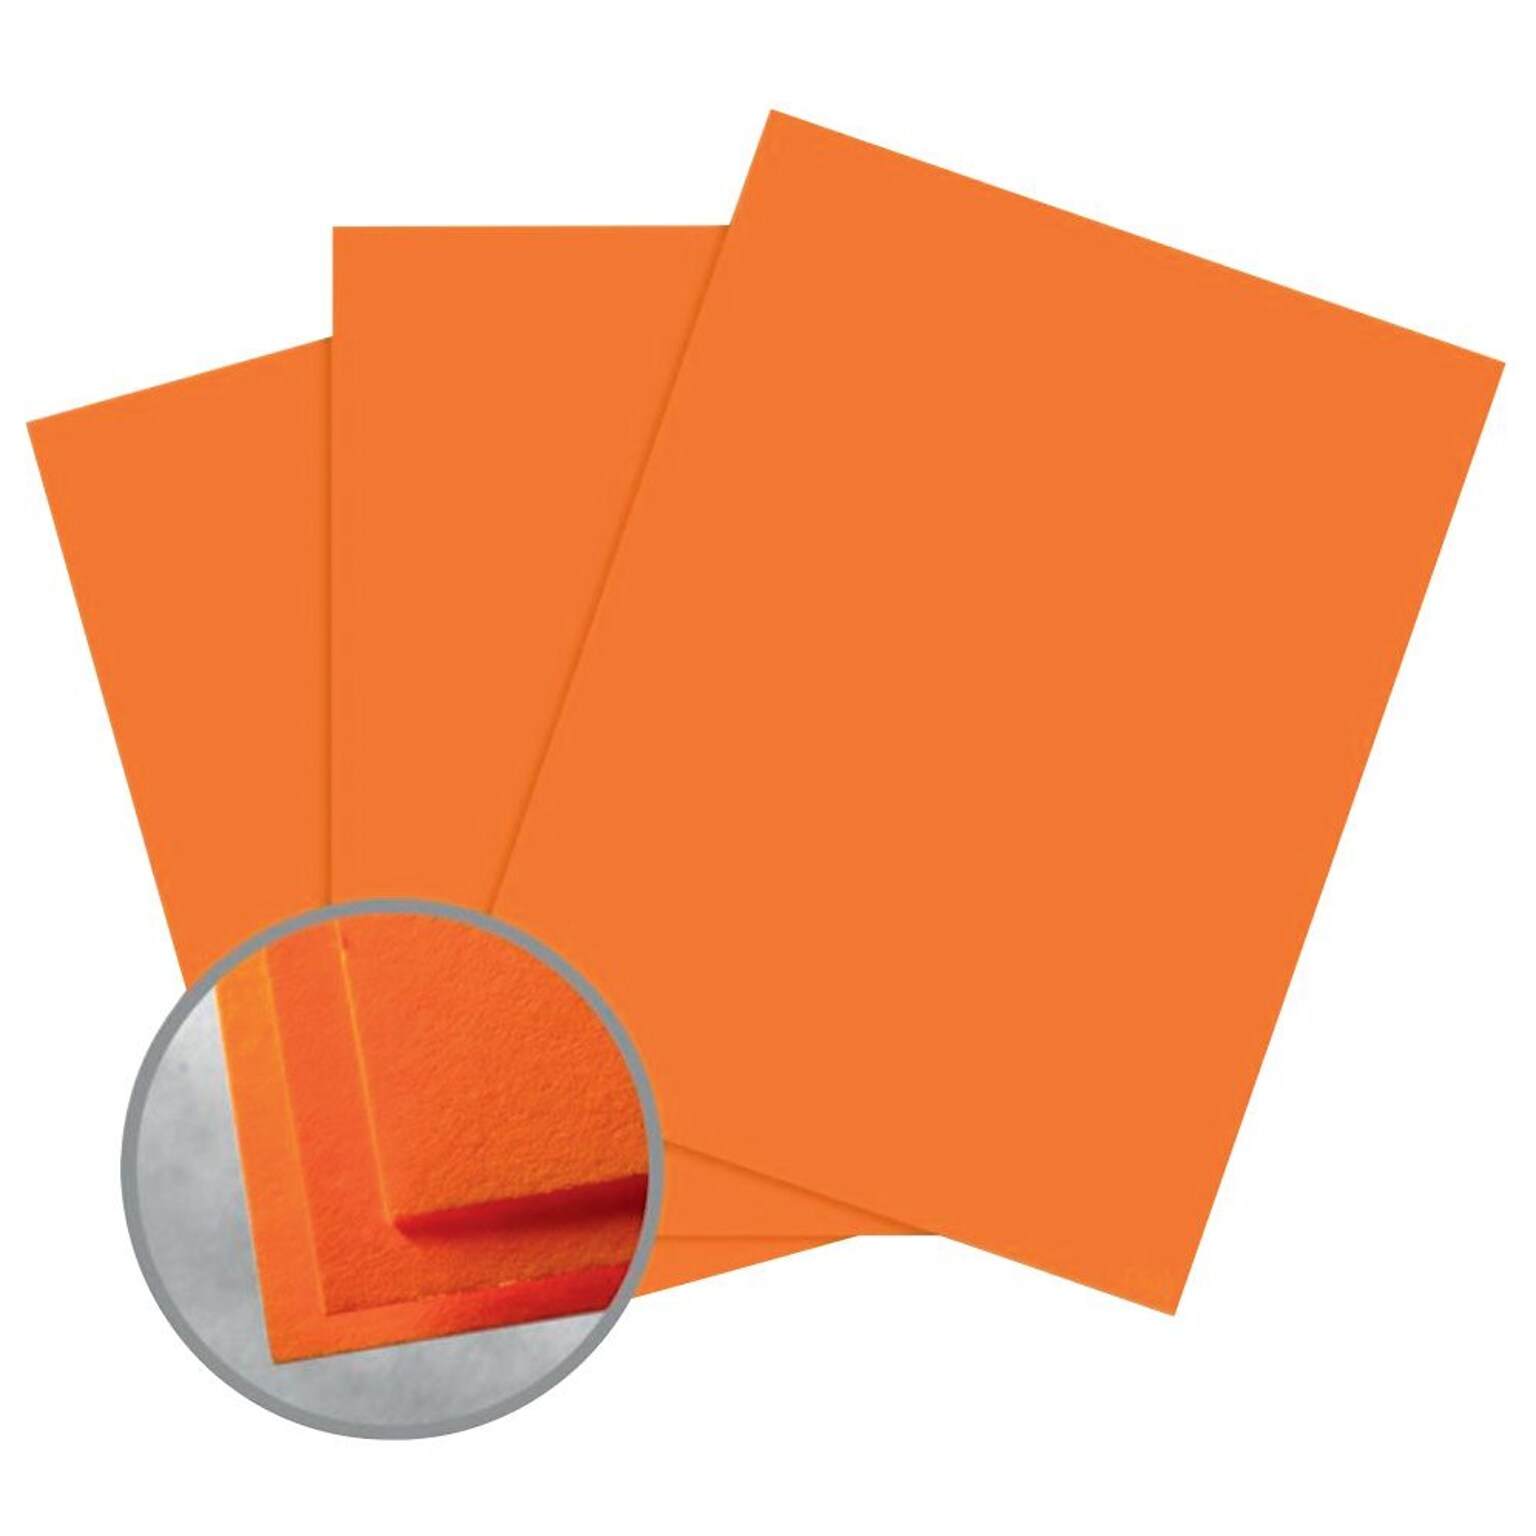 Neenah Astrobrights Smooth Colored Paper, 24 lbs, 8.5 x 11, Cosmic Orange, 5000 Sheets/Carton (22651W)